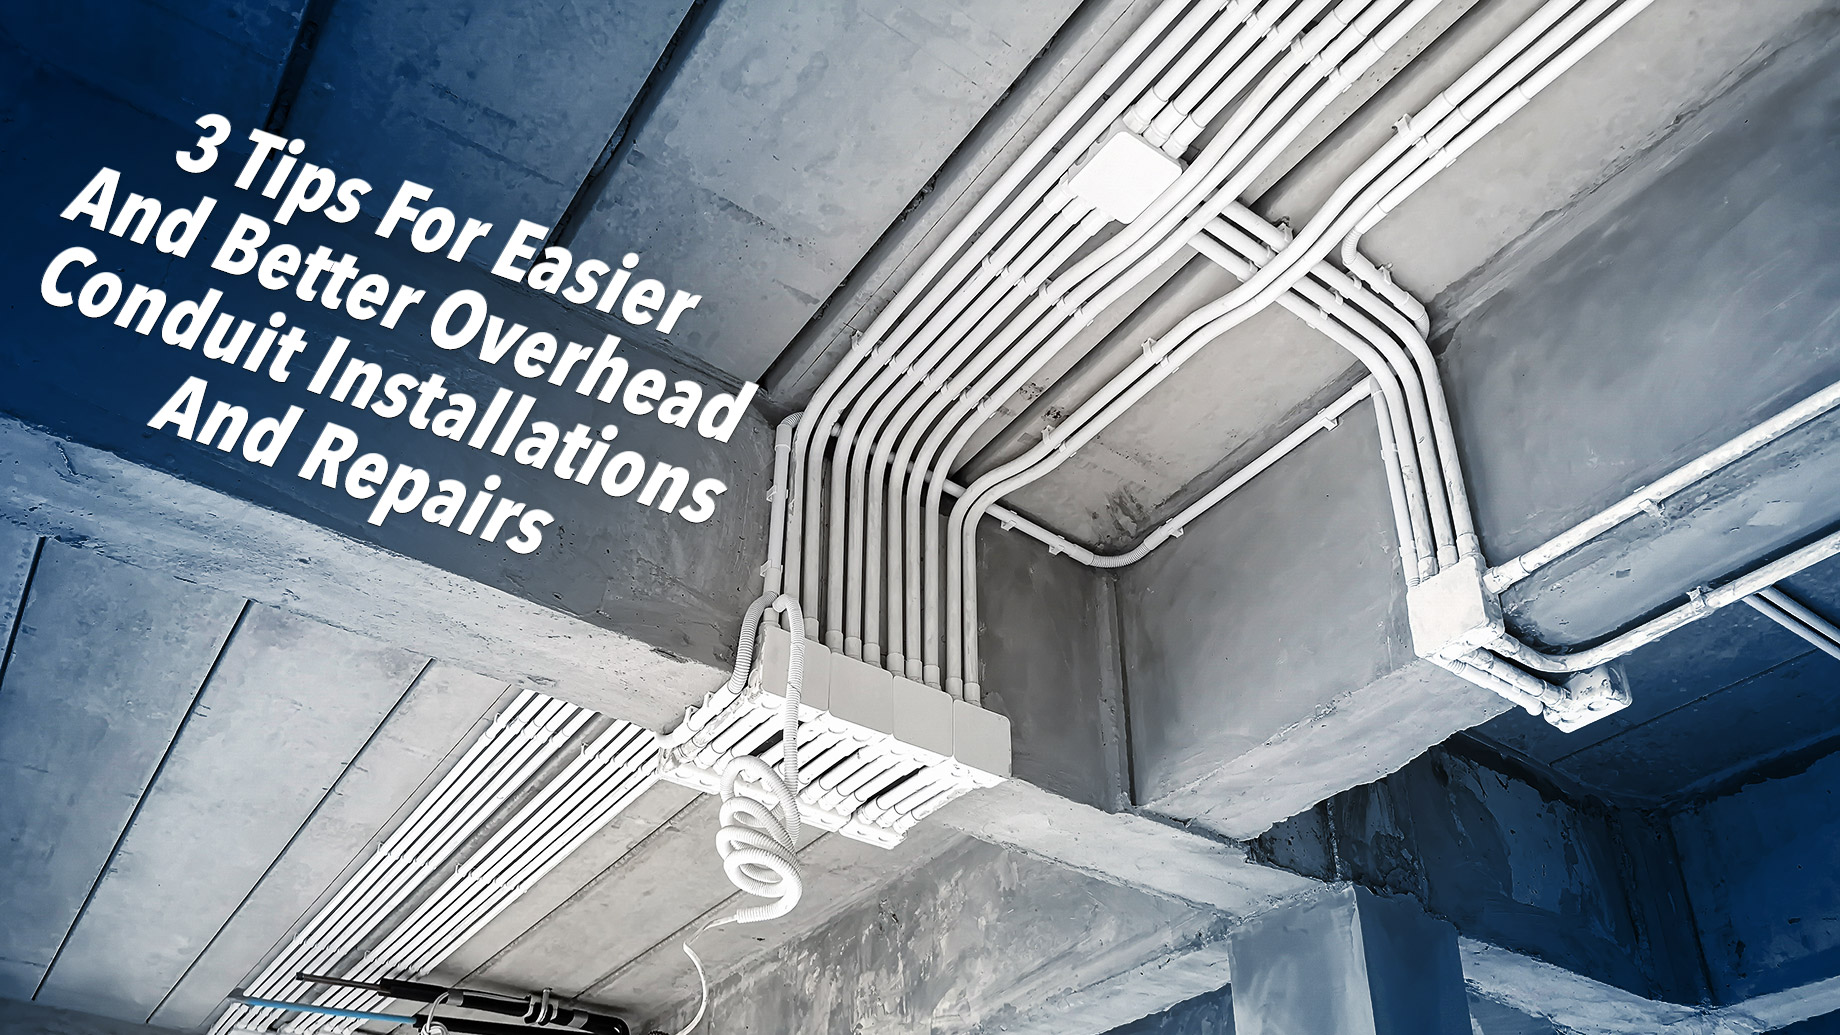 3 Tips For Easier And Better Overhead Conduit Installations And Repairs